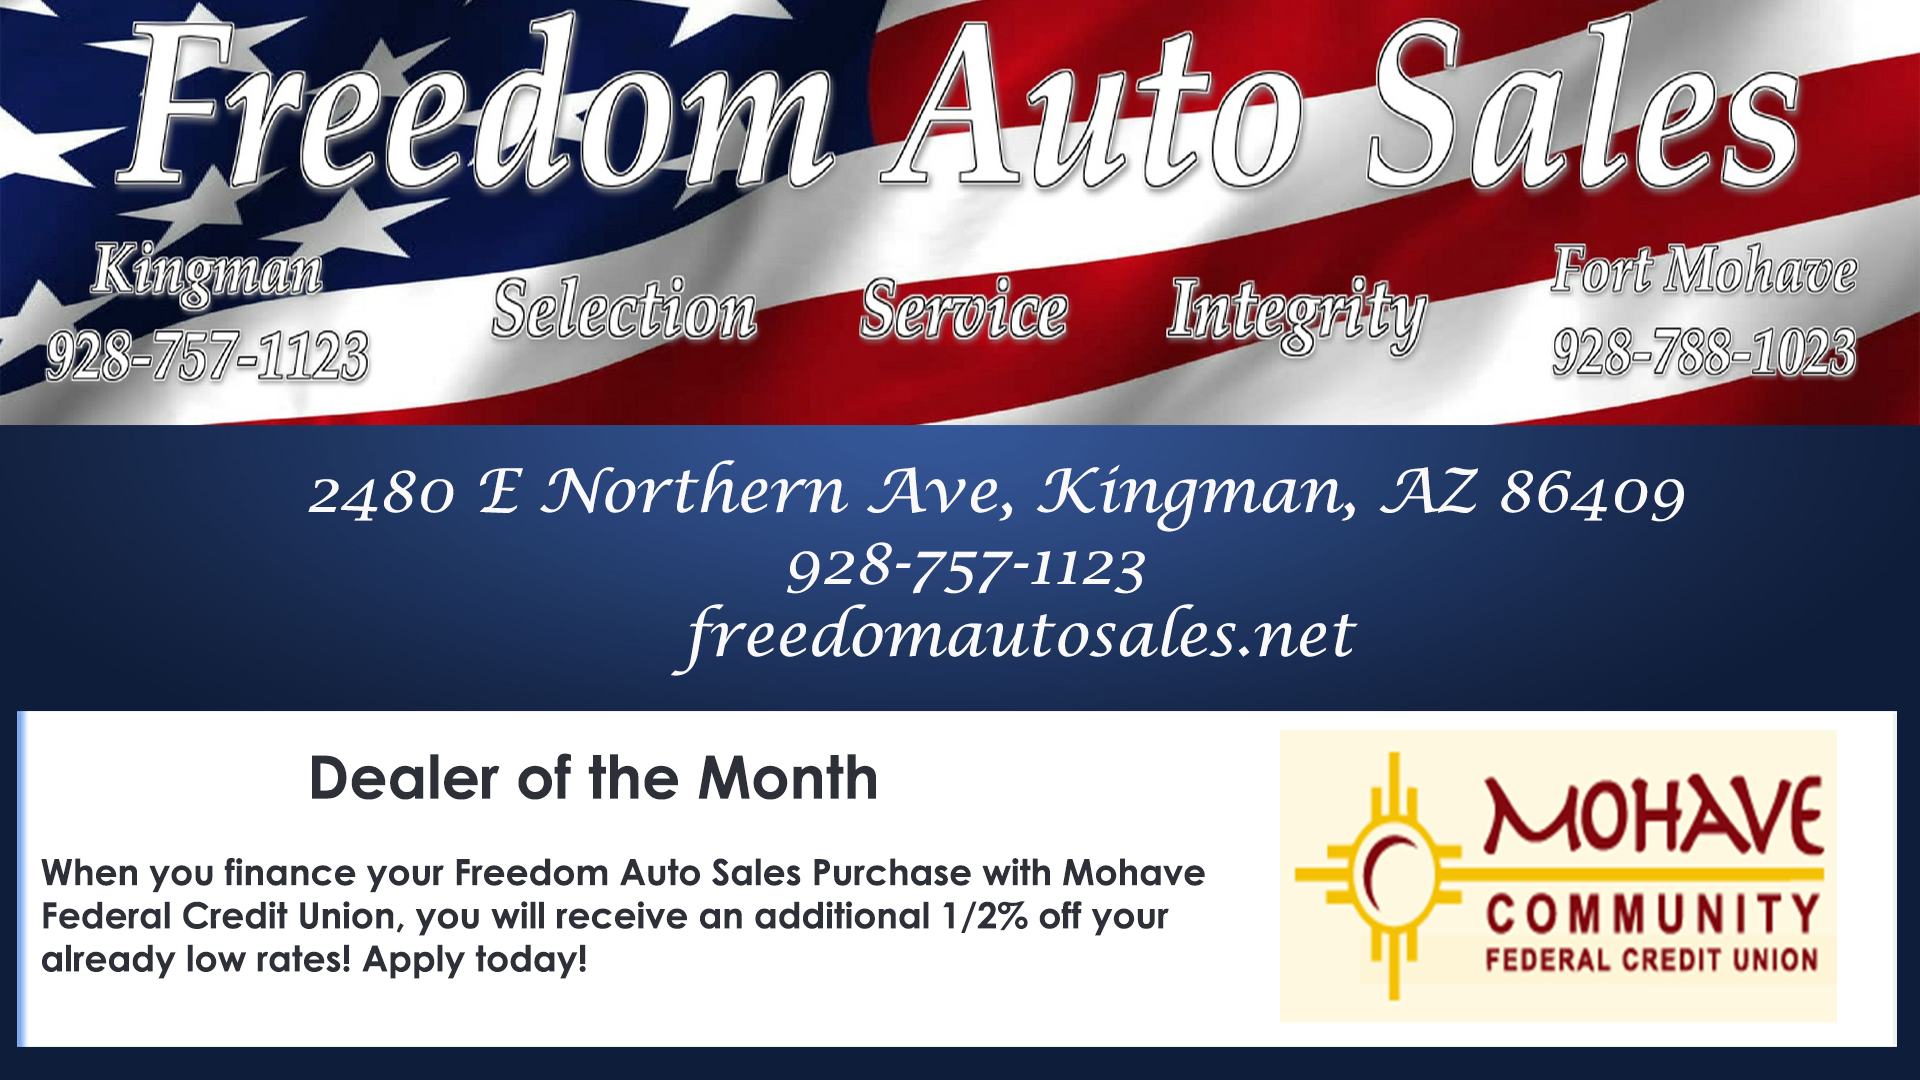 Freedom Auto Sales is our dealer of the month! Call us at 928-753-8000 for more information.